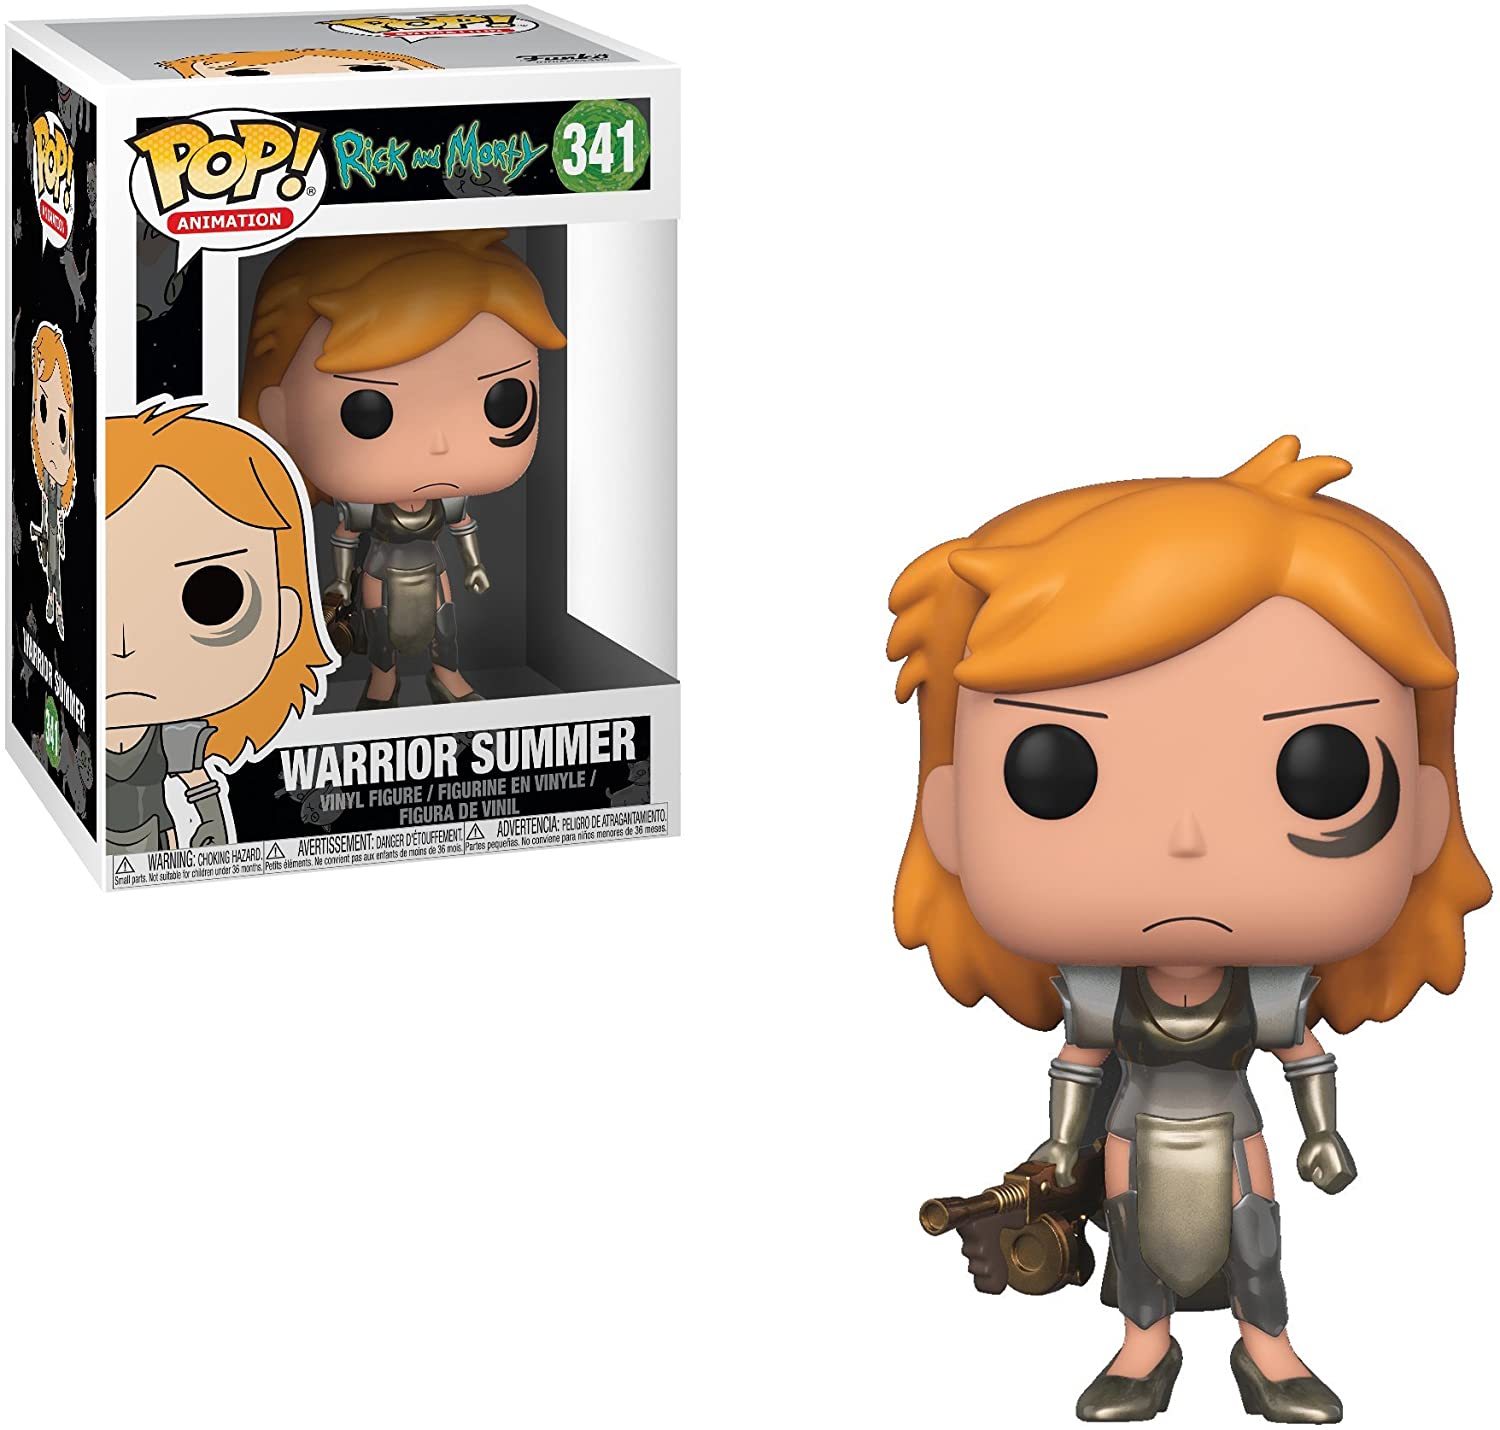 Rick And Morty - Warrior Summer 341 Funko Pop